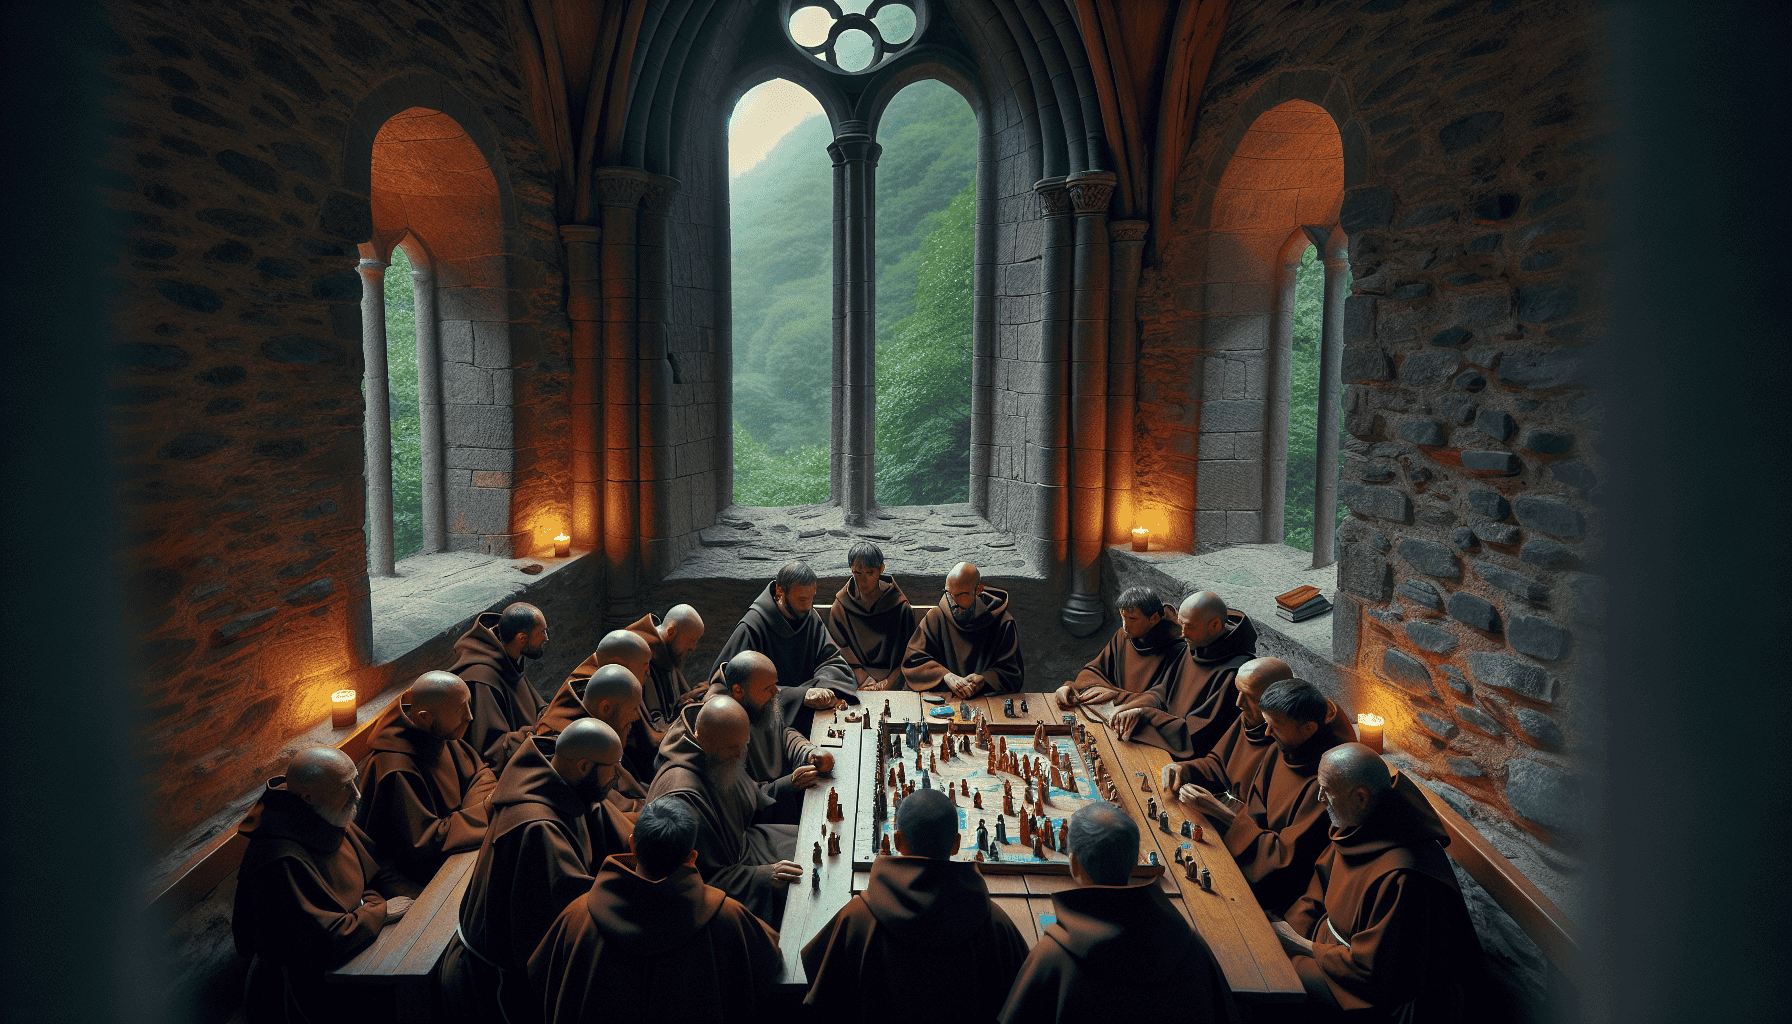 Illustration of medieval monastery with monks playing a book lovers game